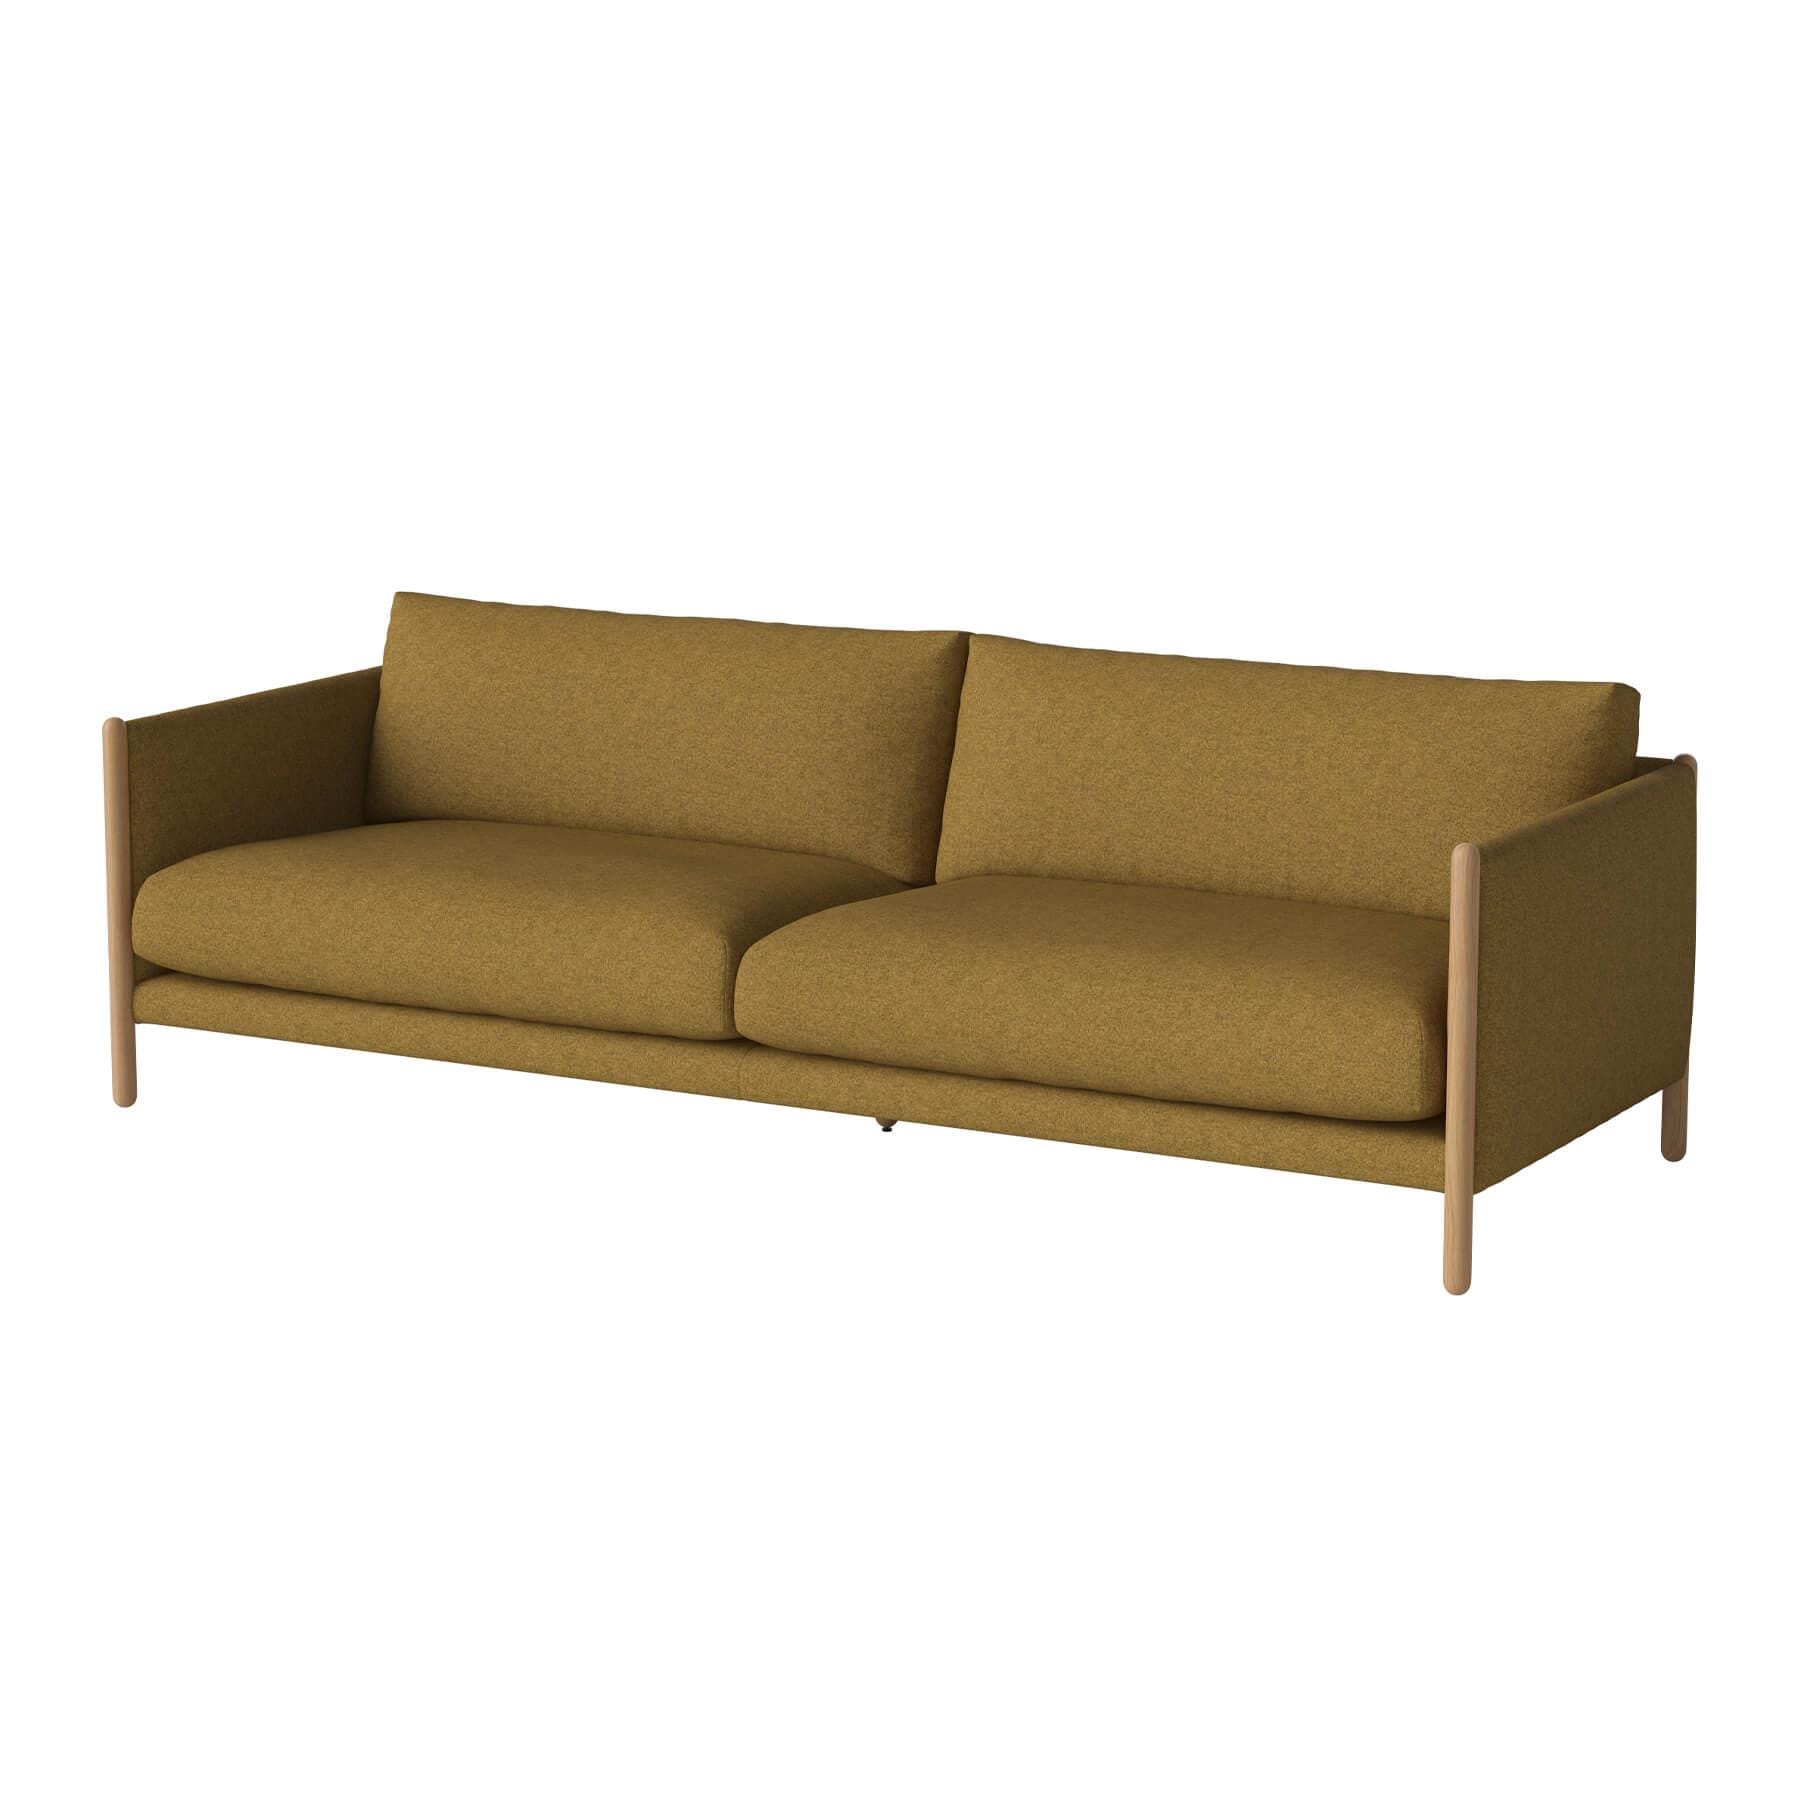 Bolia Hayden Sofa 3 Seater Sofa Oiled Oak Qual Curry Brown Designer Furniture From Holloways Of Ludlow